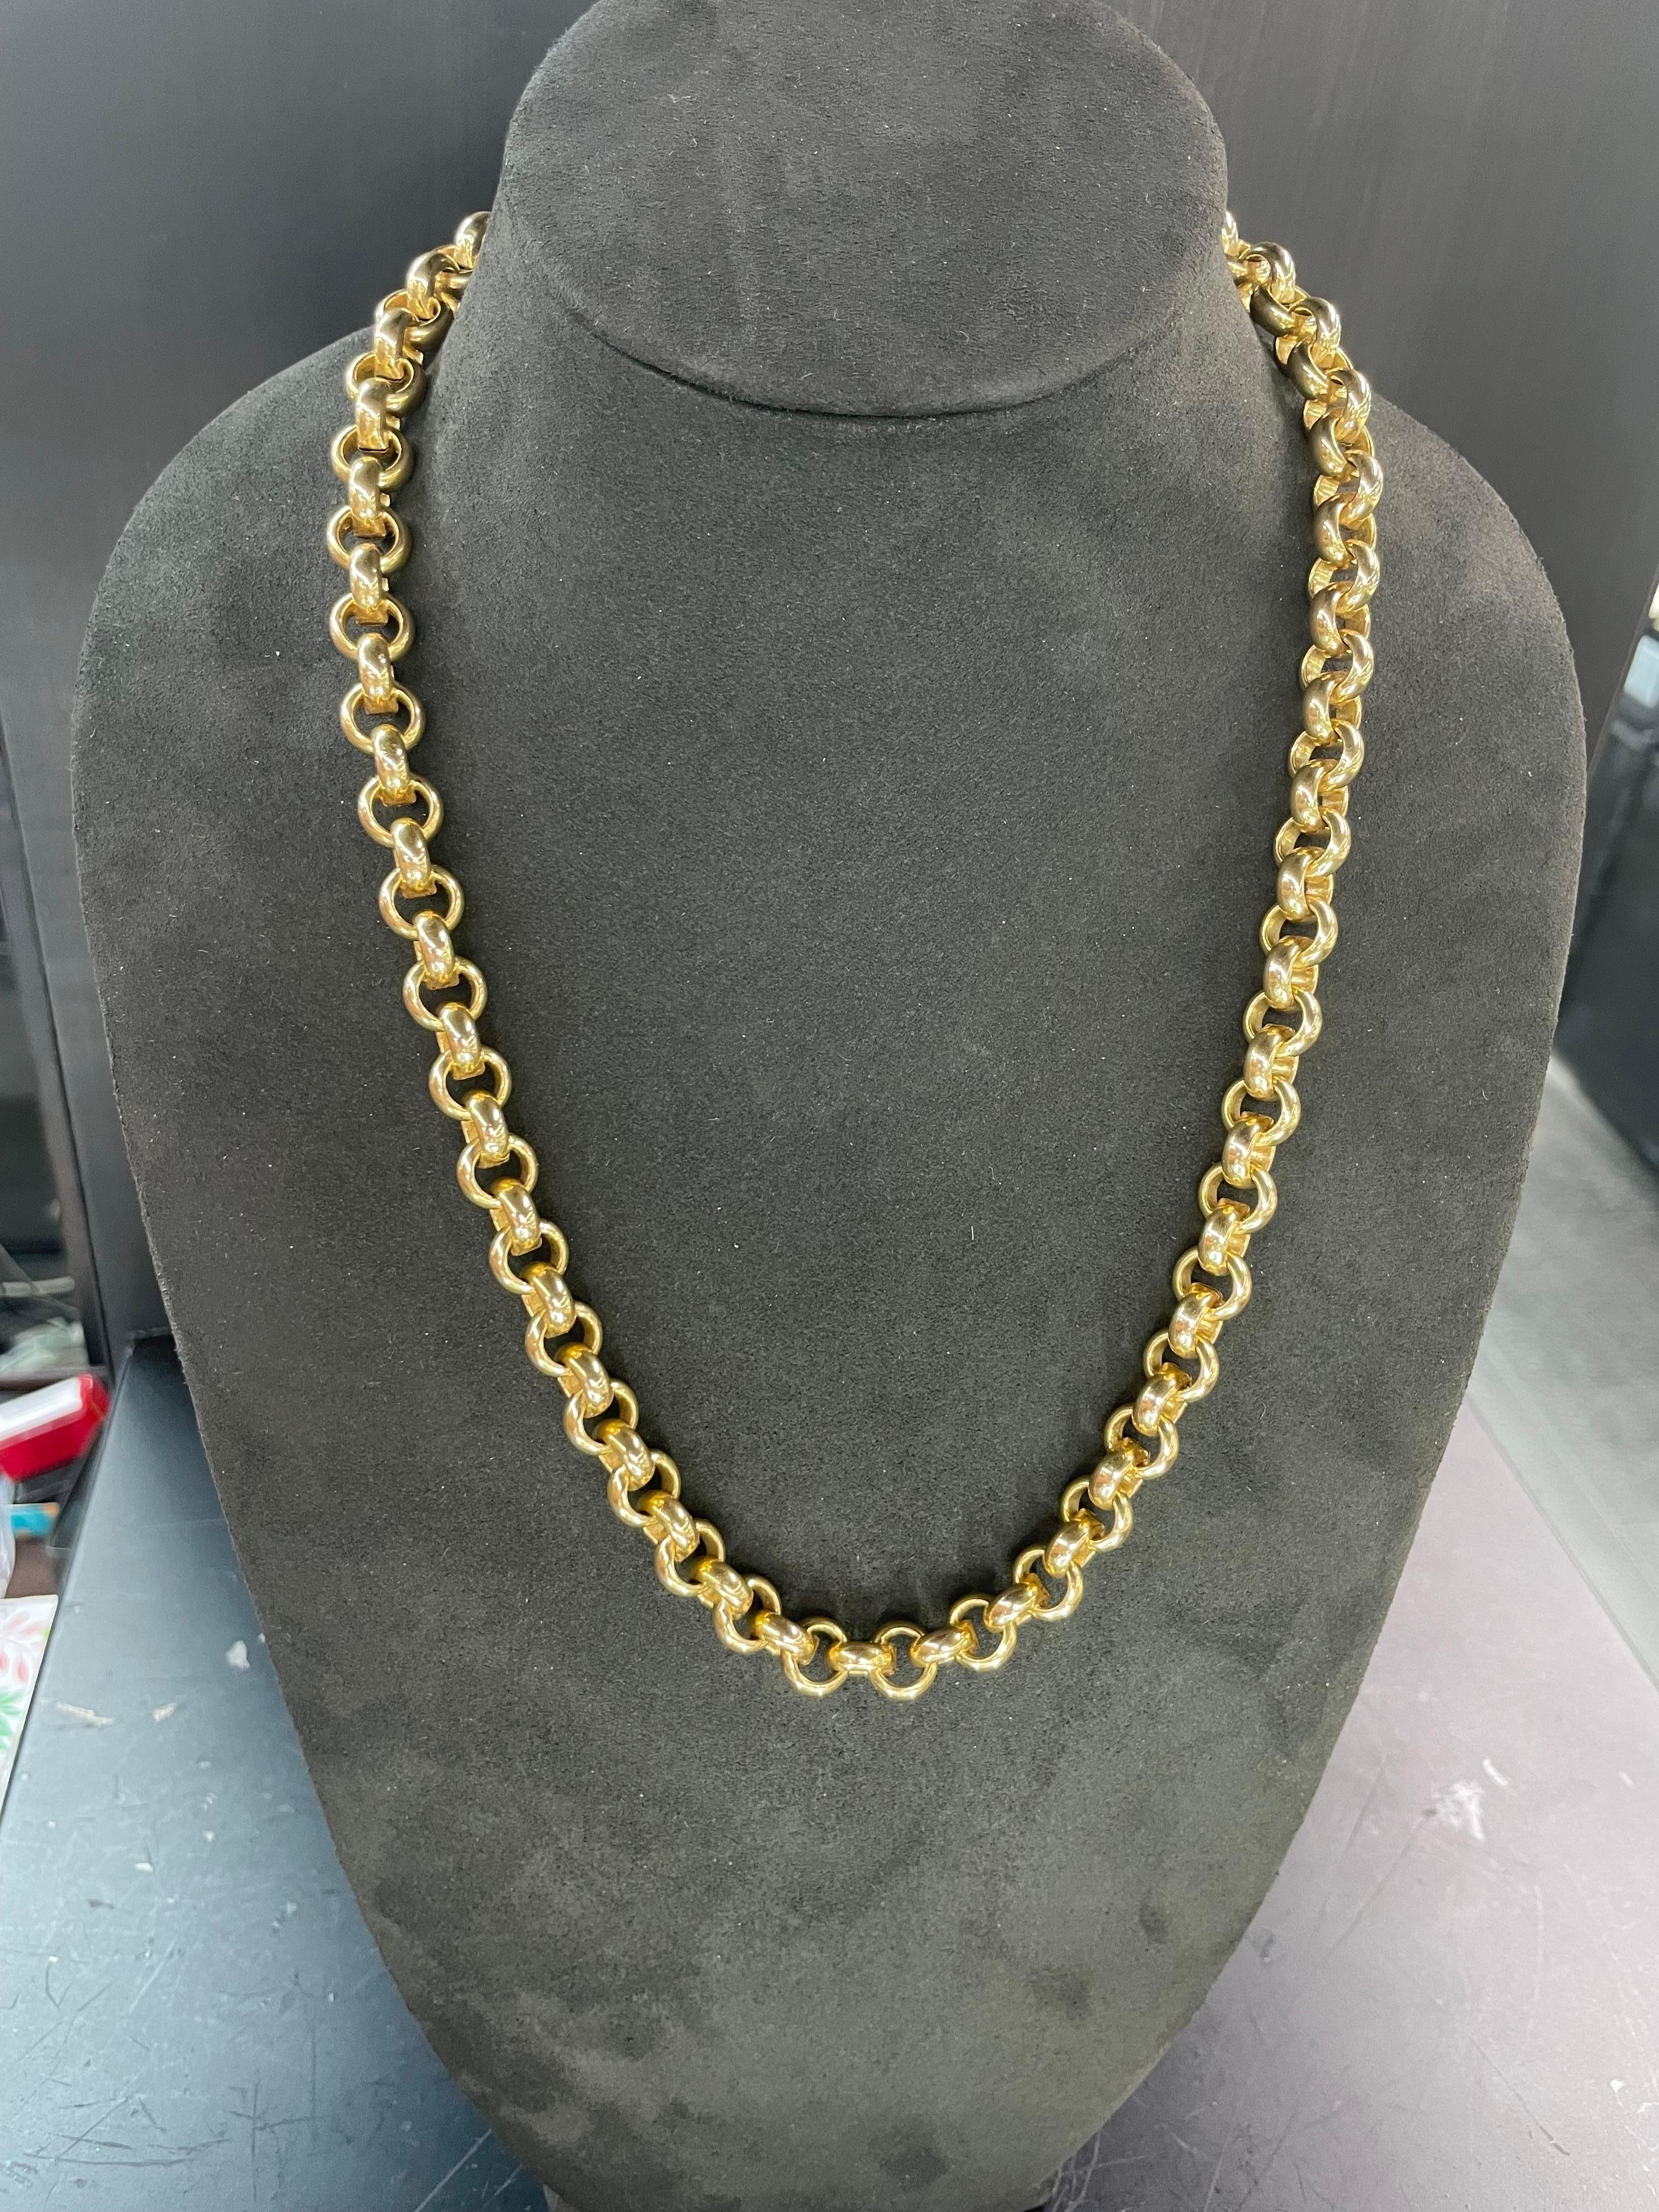 UnoAErre, 14 Karat Yellow Gold link necklace featuring 84 Rolo links weighing 68.9 Grams. Can be wrapped around the wrist as a bracelet. 
Made in Italy.